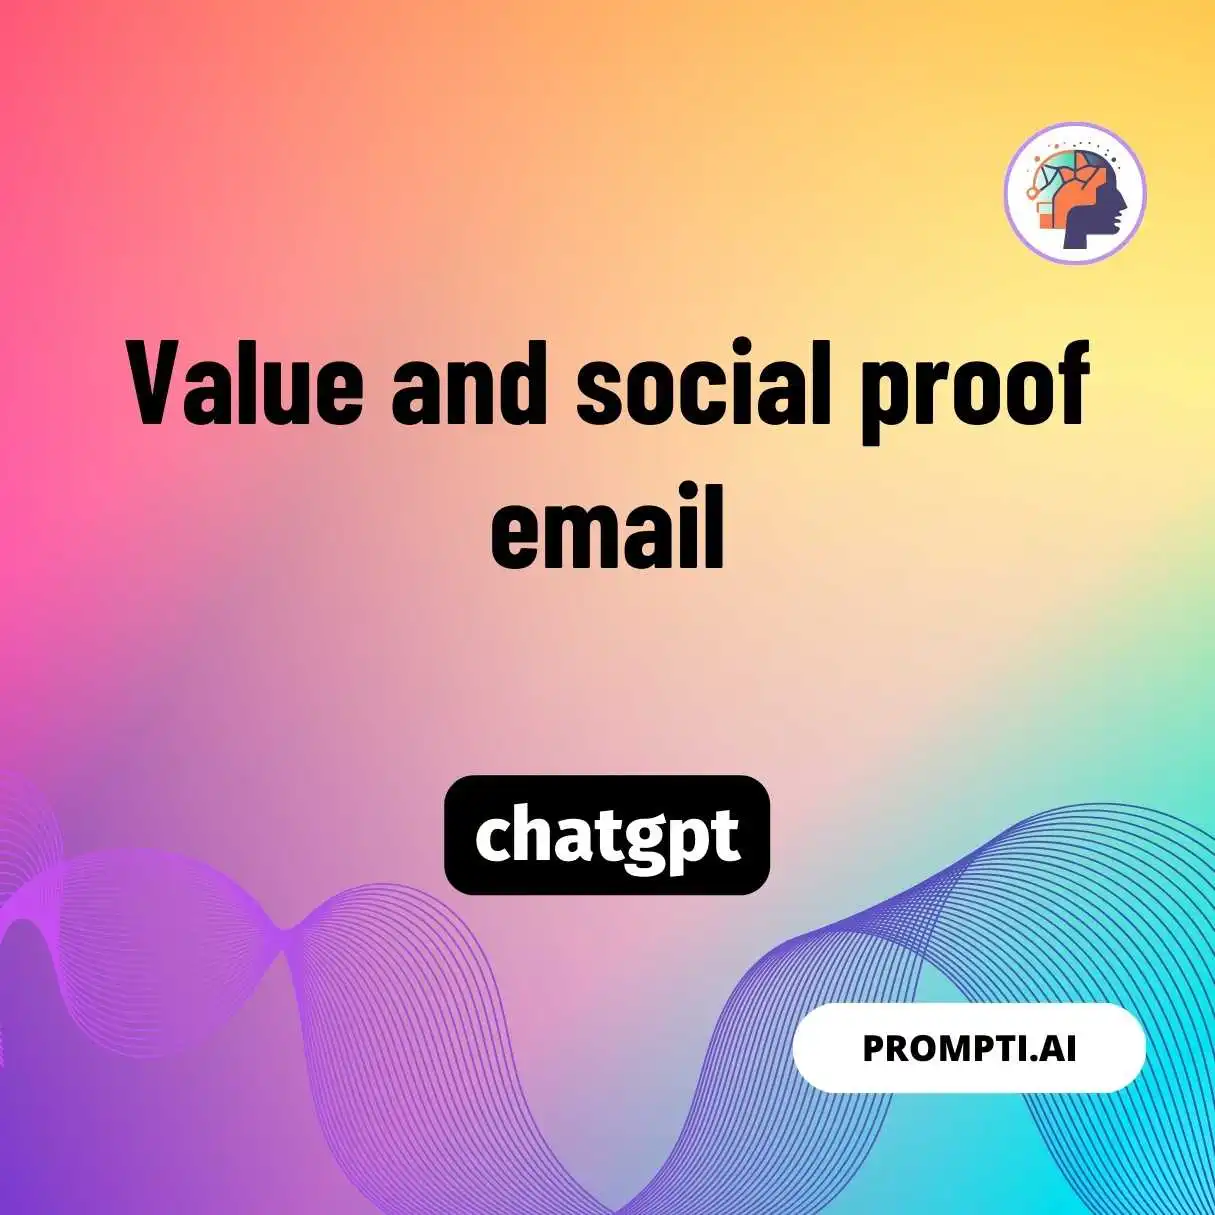 Value and social proof email